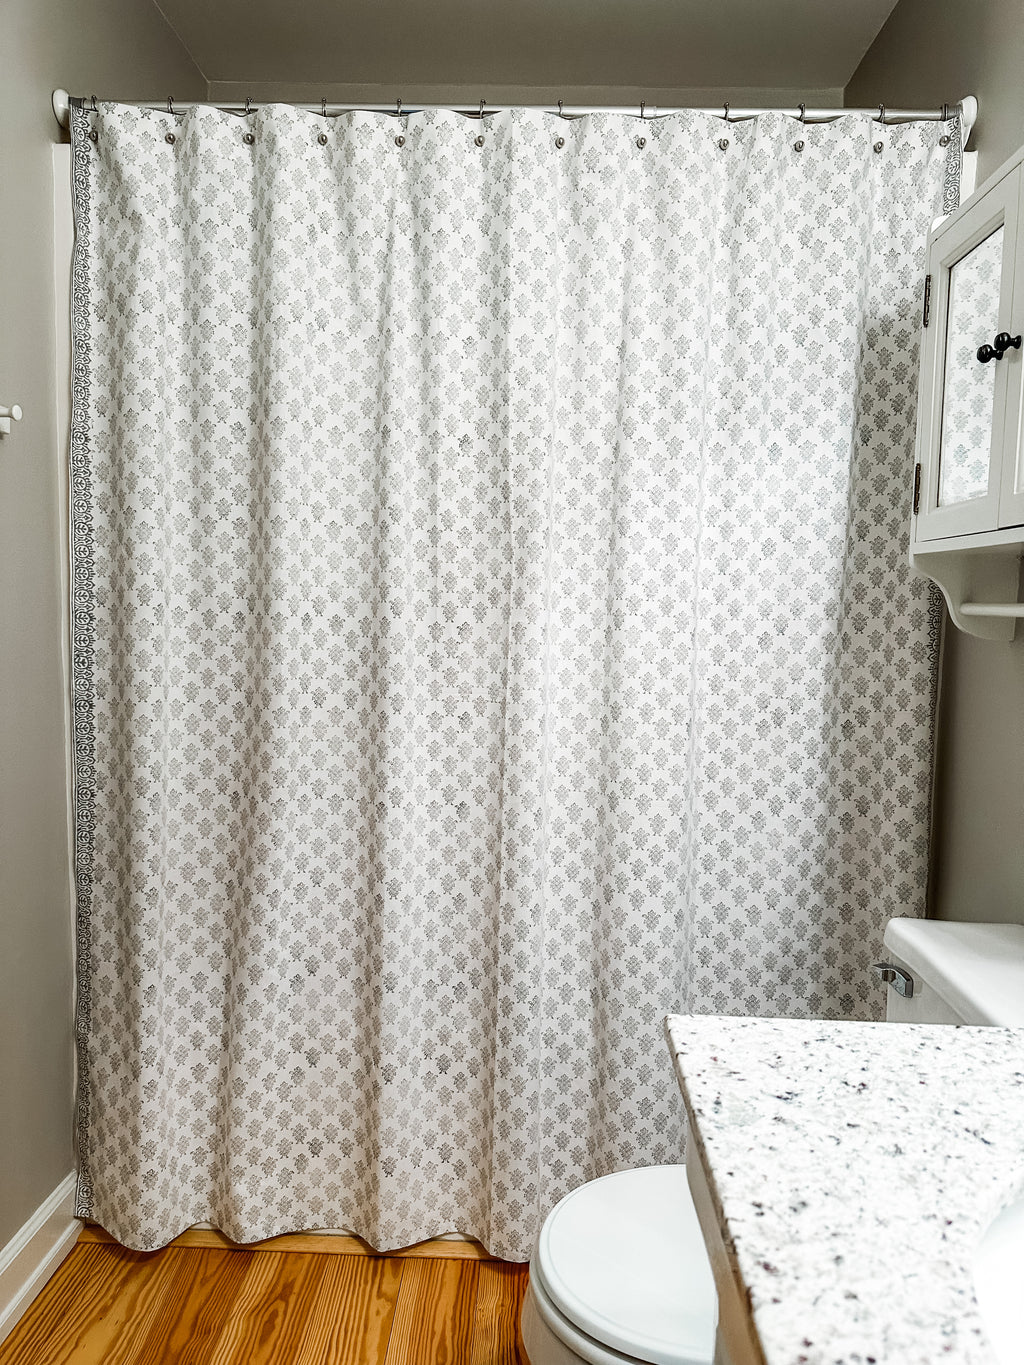 Shower Curtain - August Print in Tern Gray